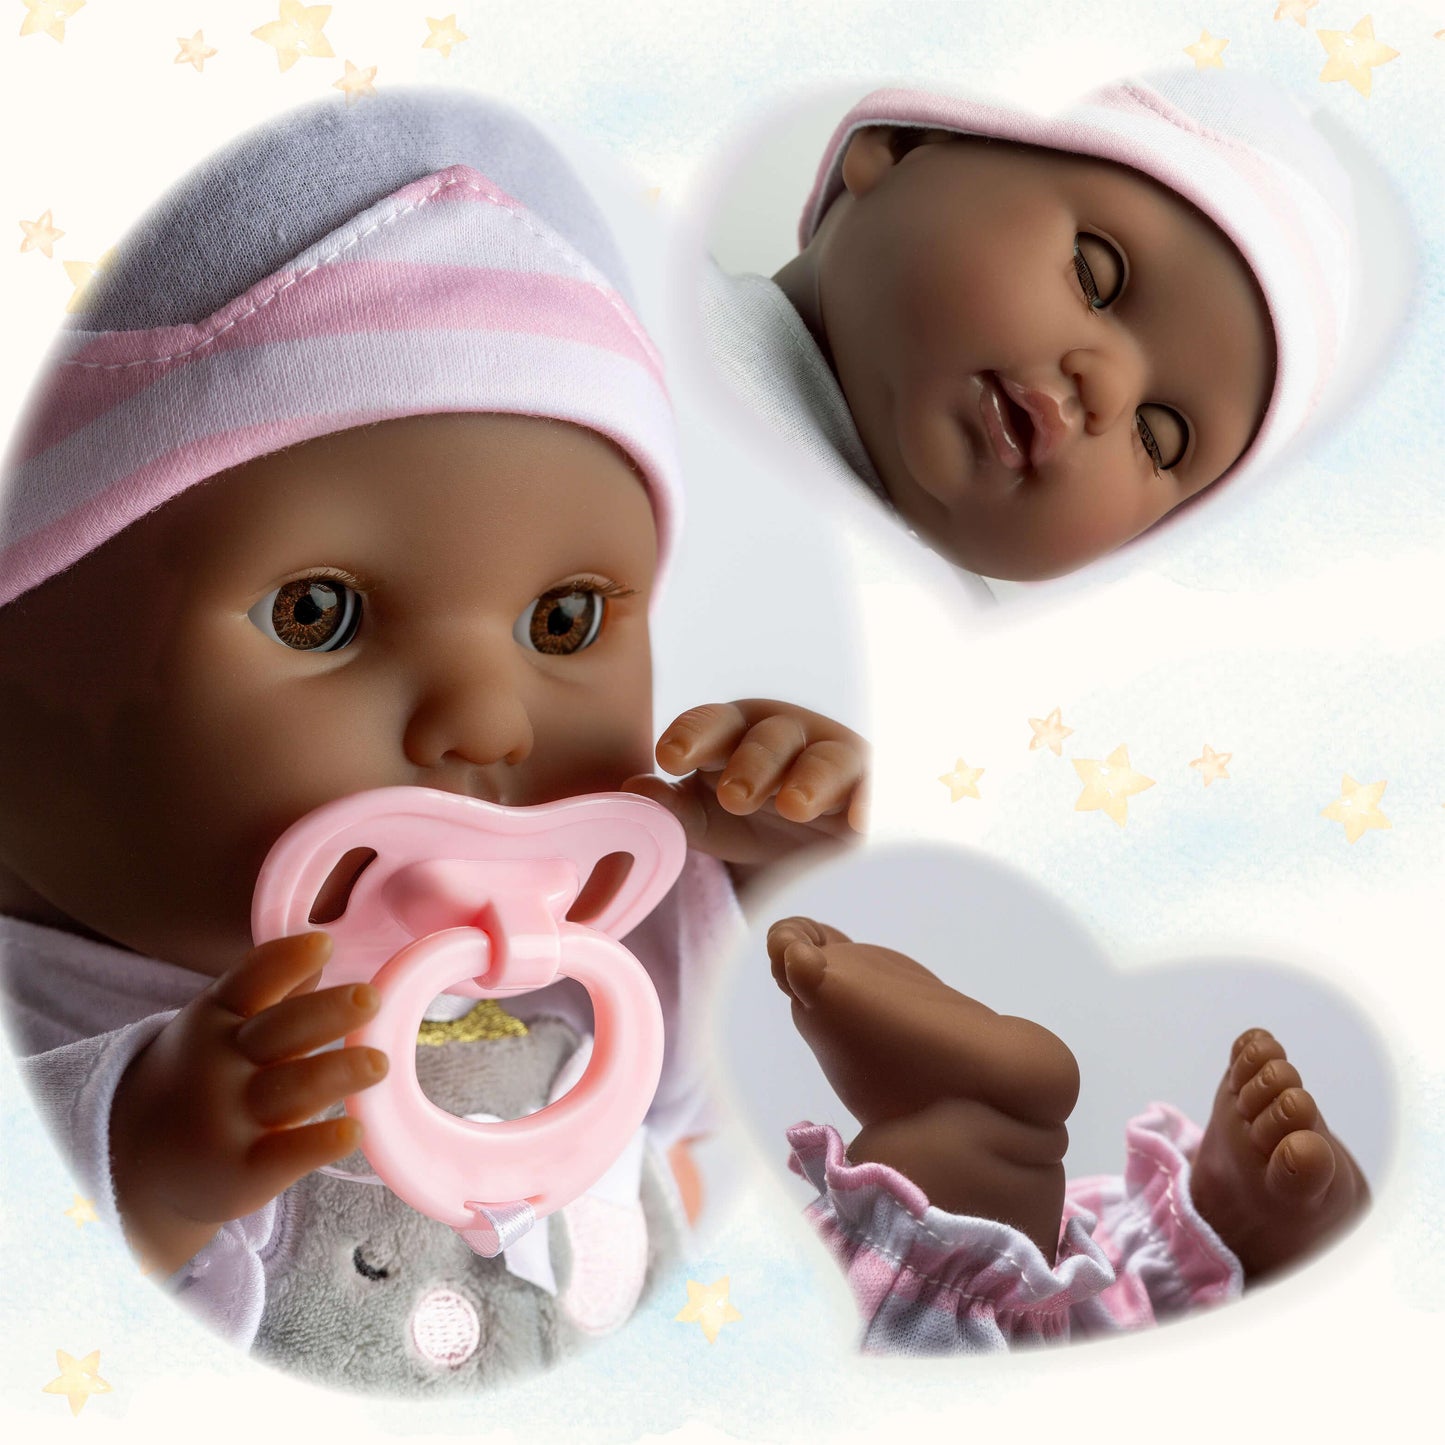 Berenguer Boutique 15" Realistic Soft Body African American Baby Doll Open/Close Eyes 10 Pcs. Set - JC Toys Group Inc.